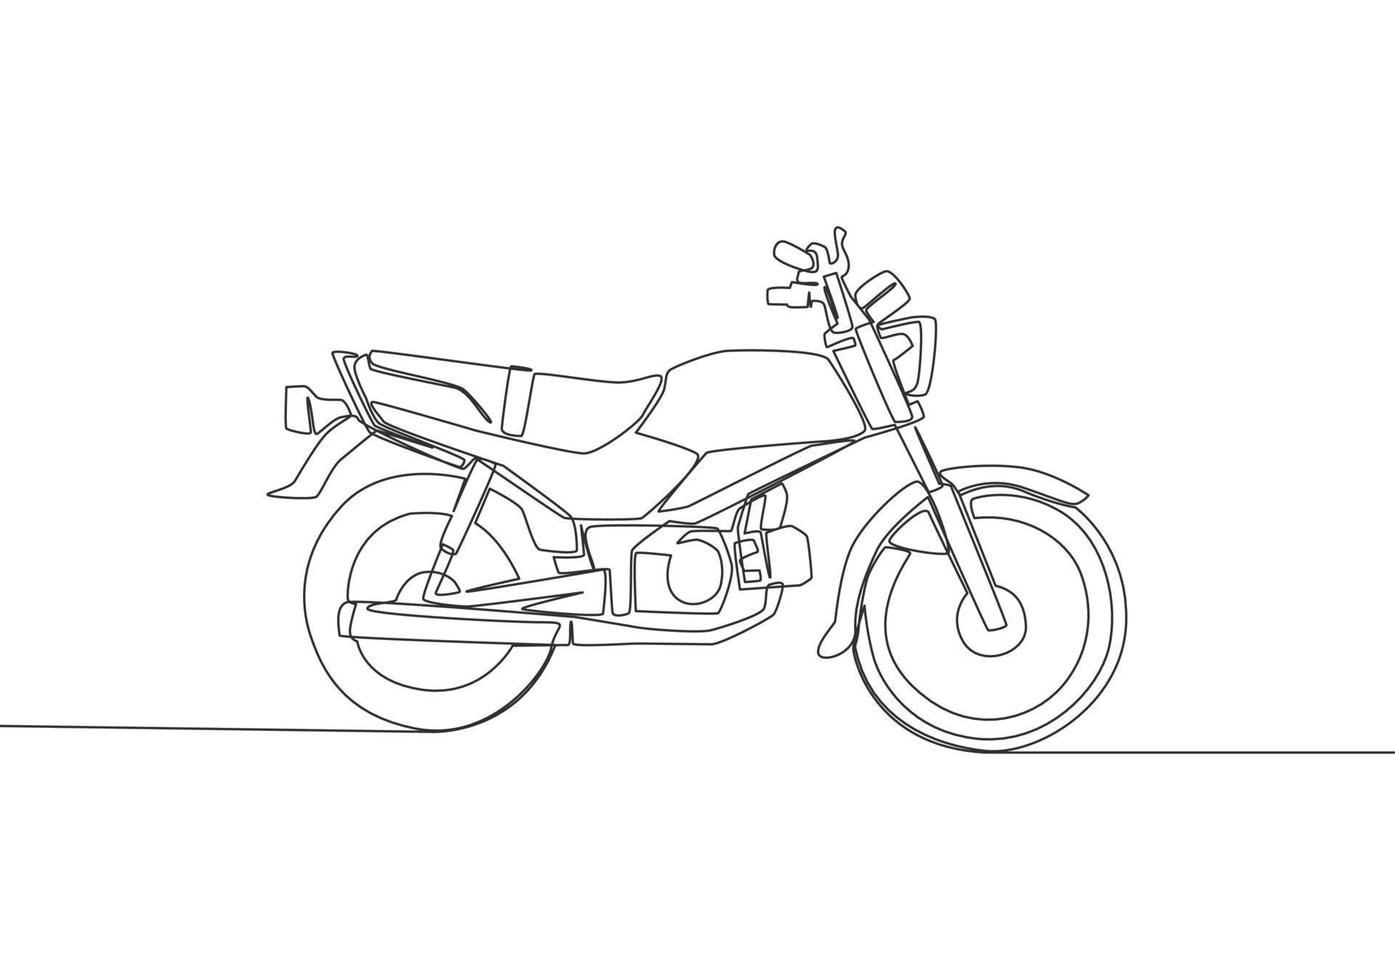 One single line drawing of vintage motorbike logo. Classic rural motorcycle concept. Continuous line draw design vector illustration